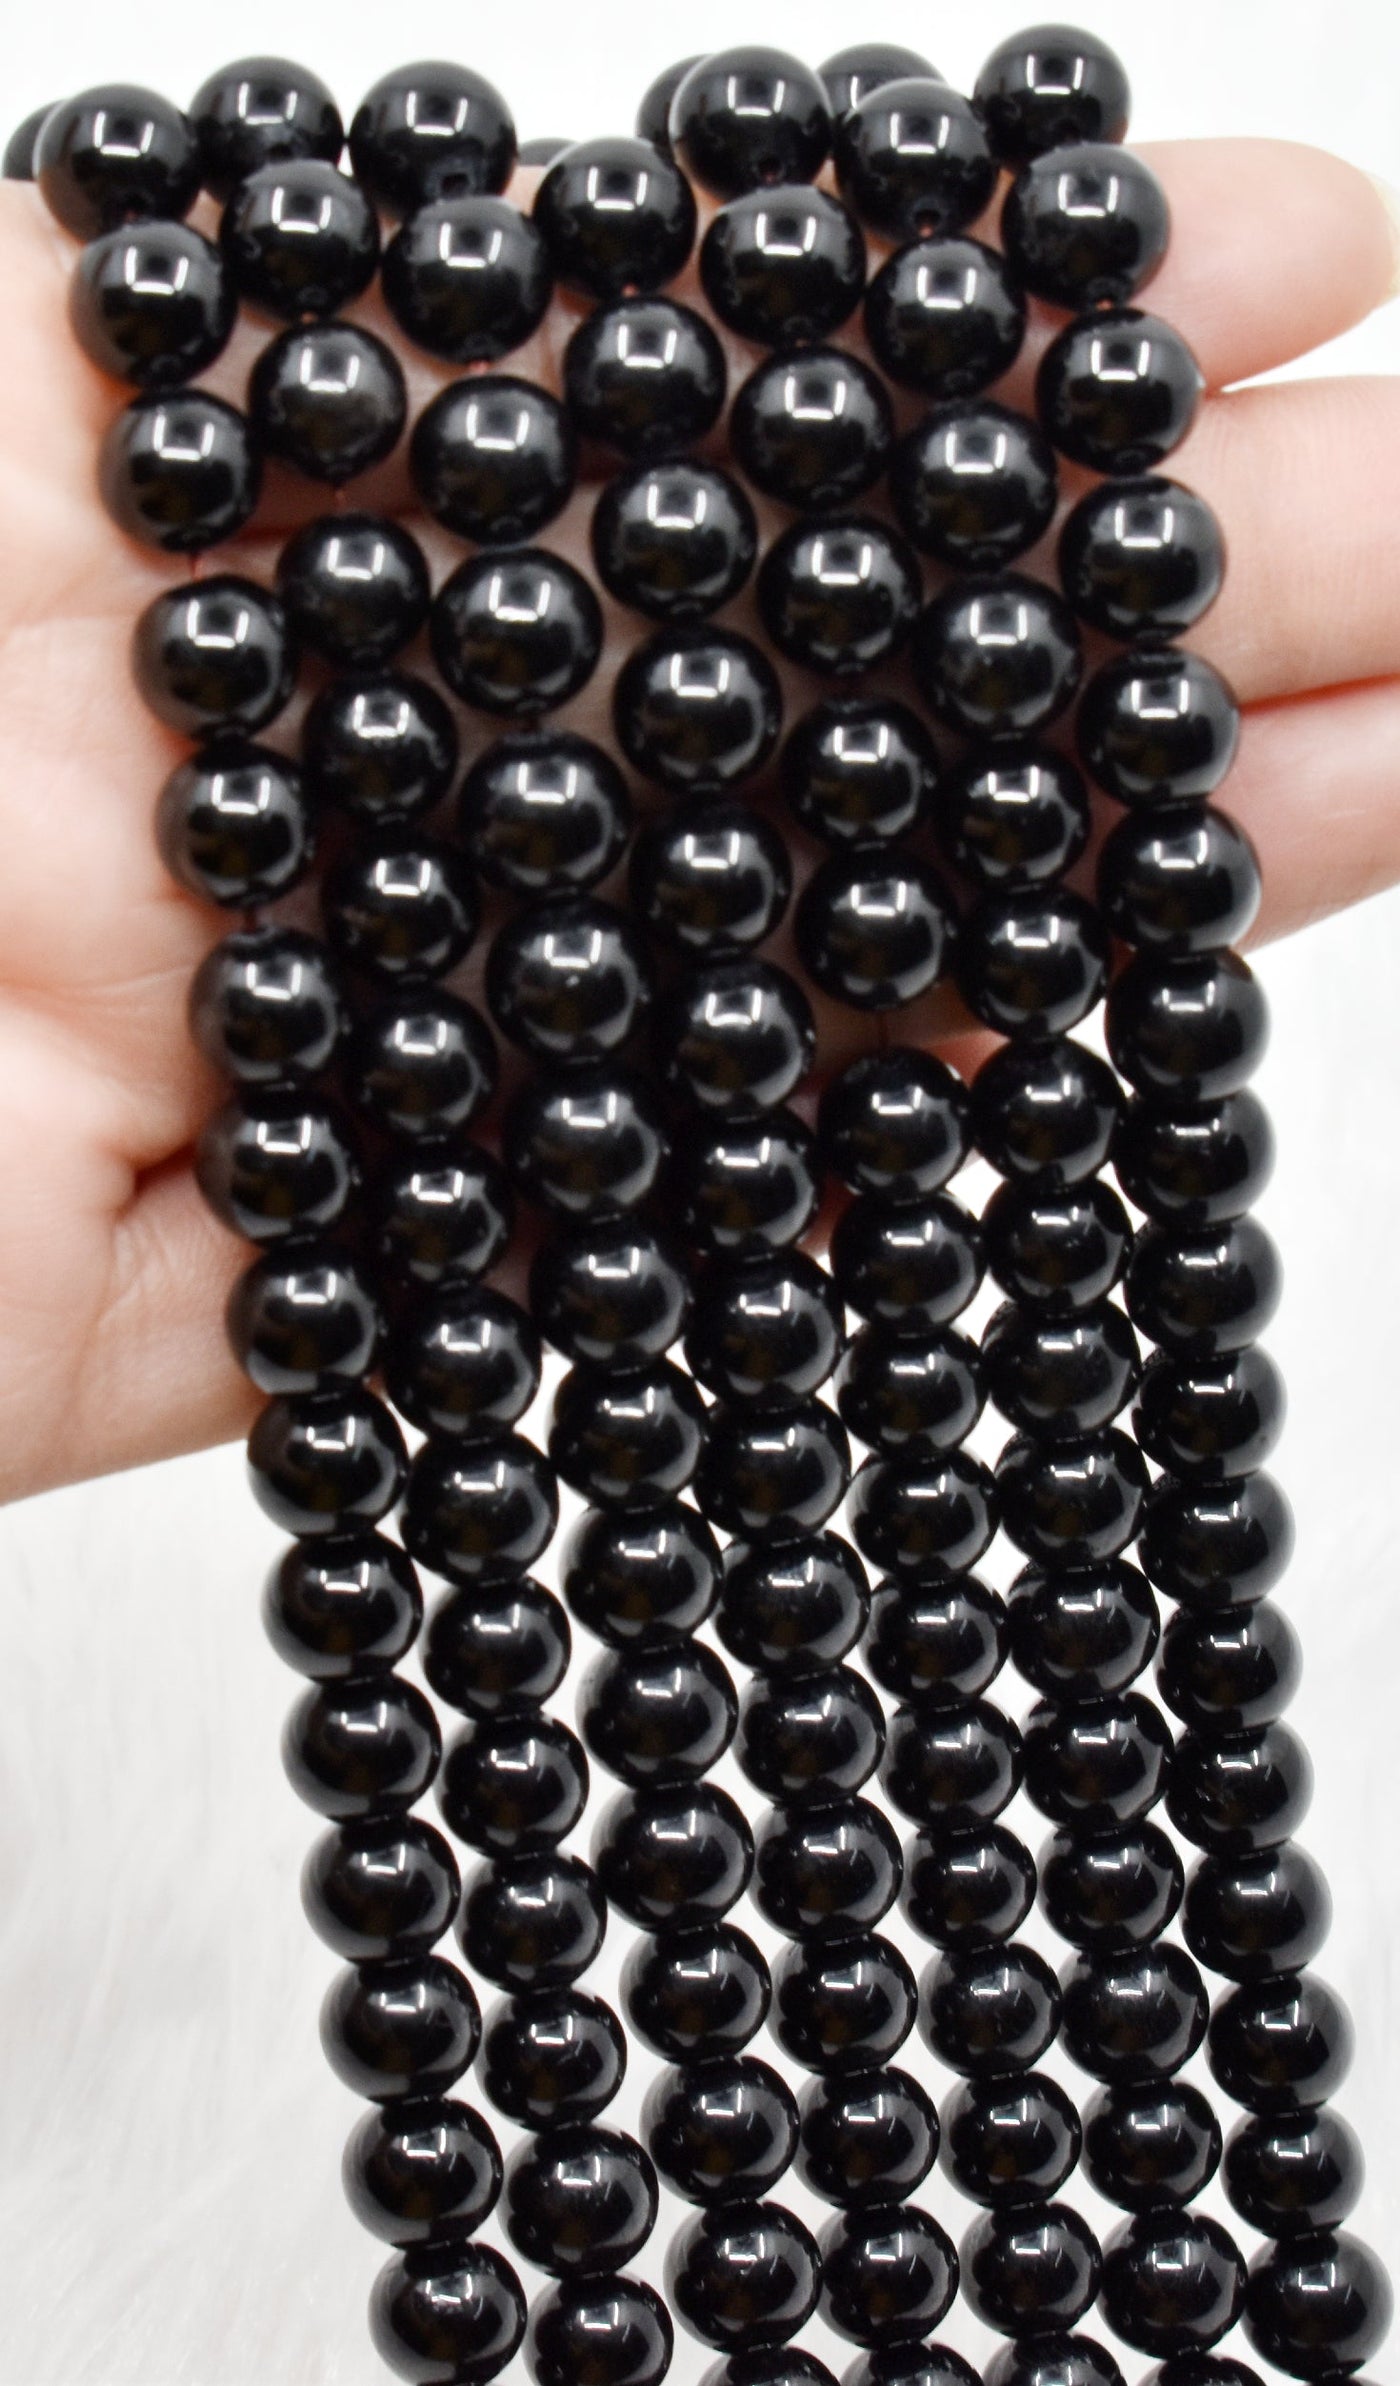 Black Tourmaline Beads, Natural Round Crystal Beads 4mm to 12mm